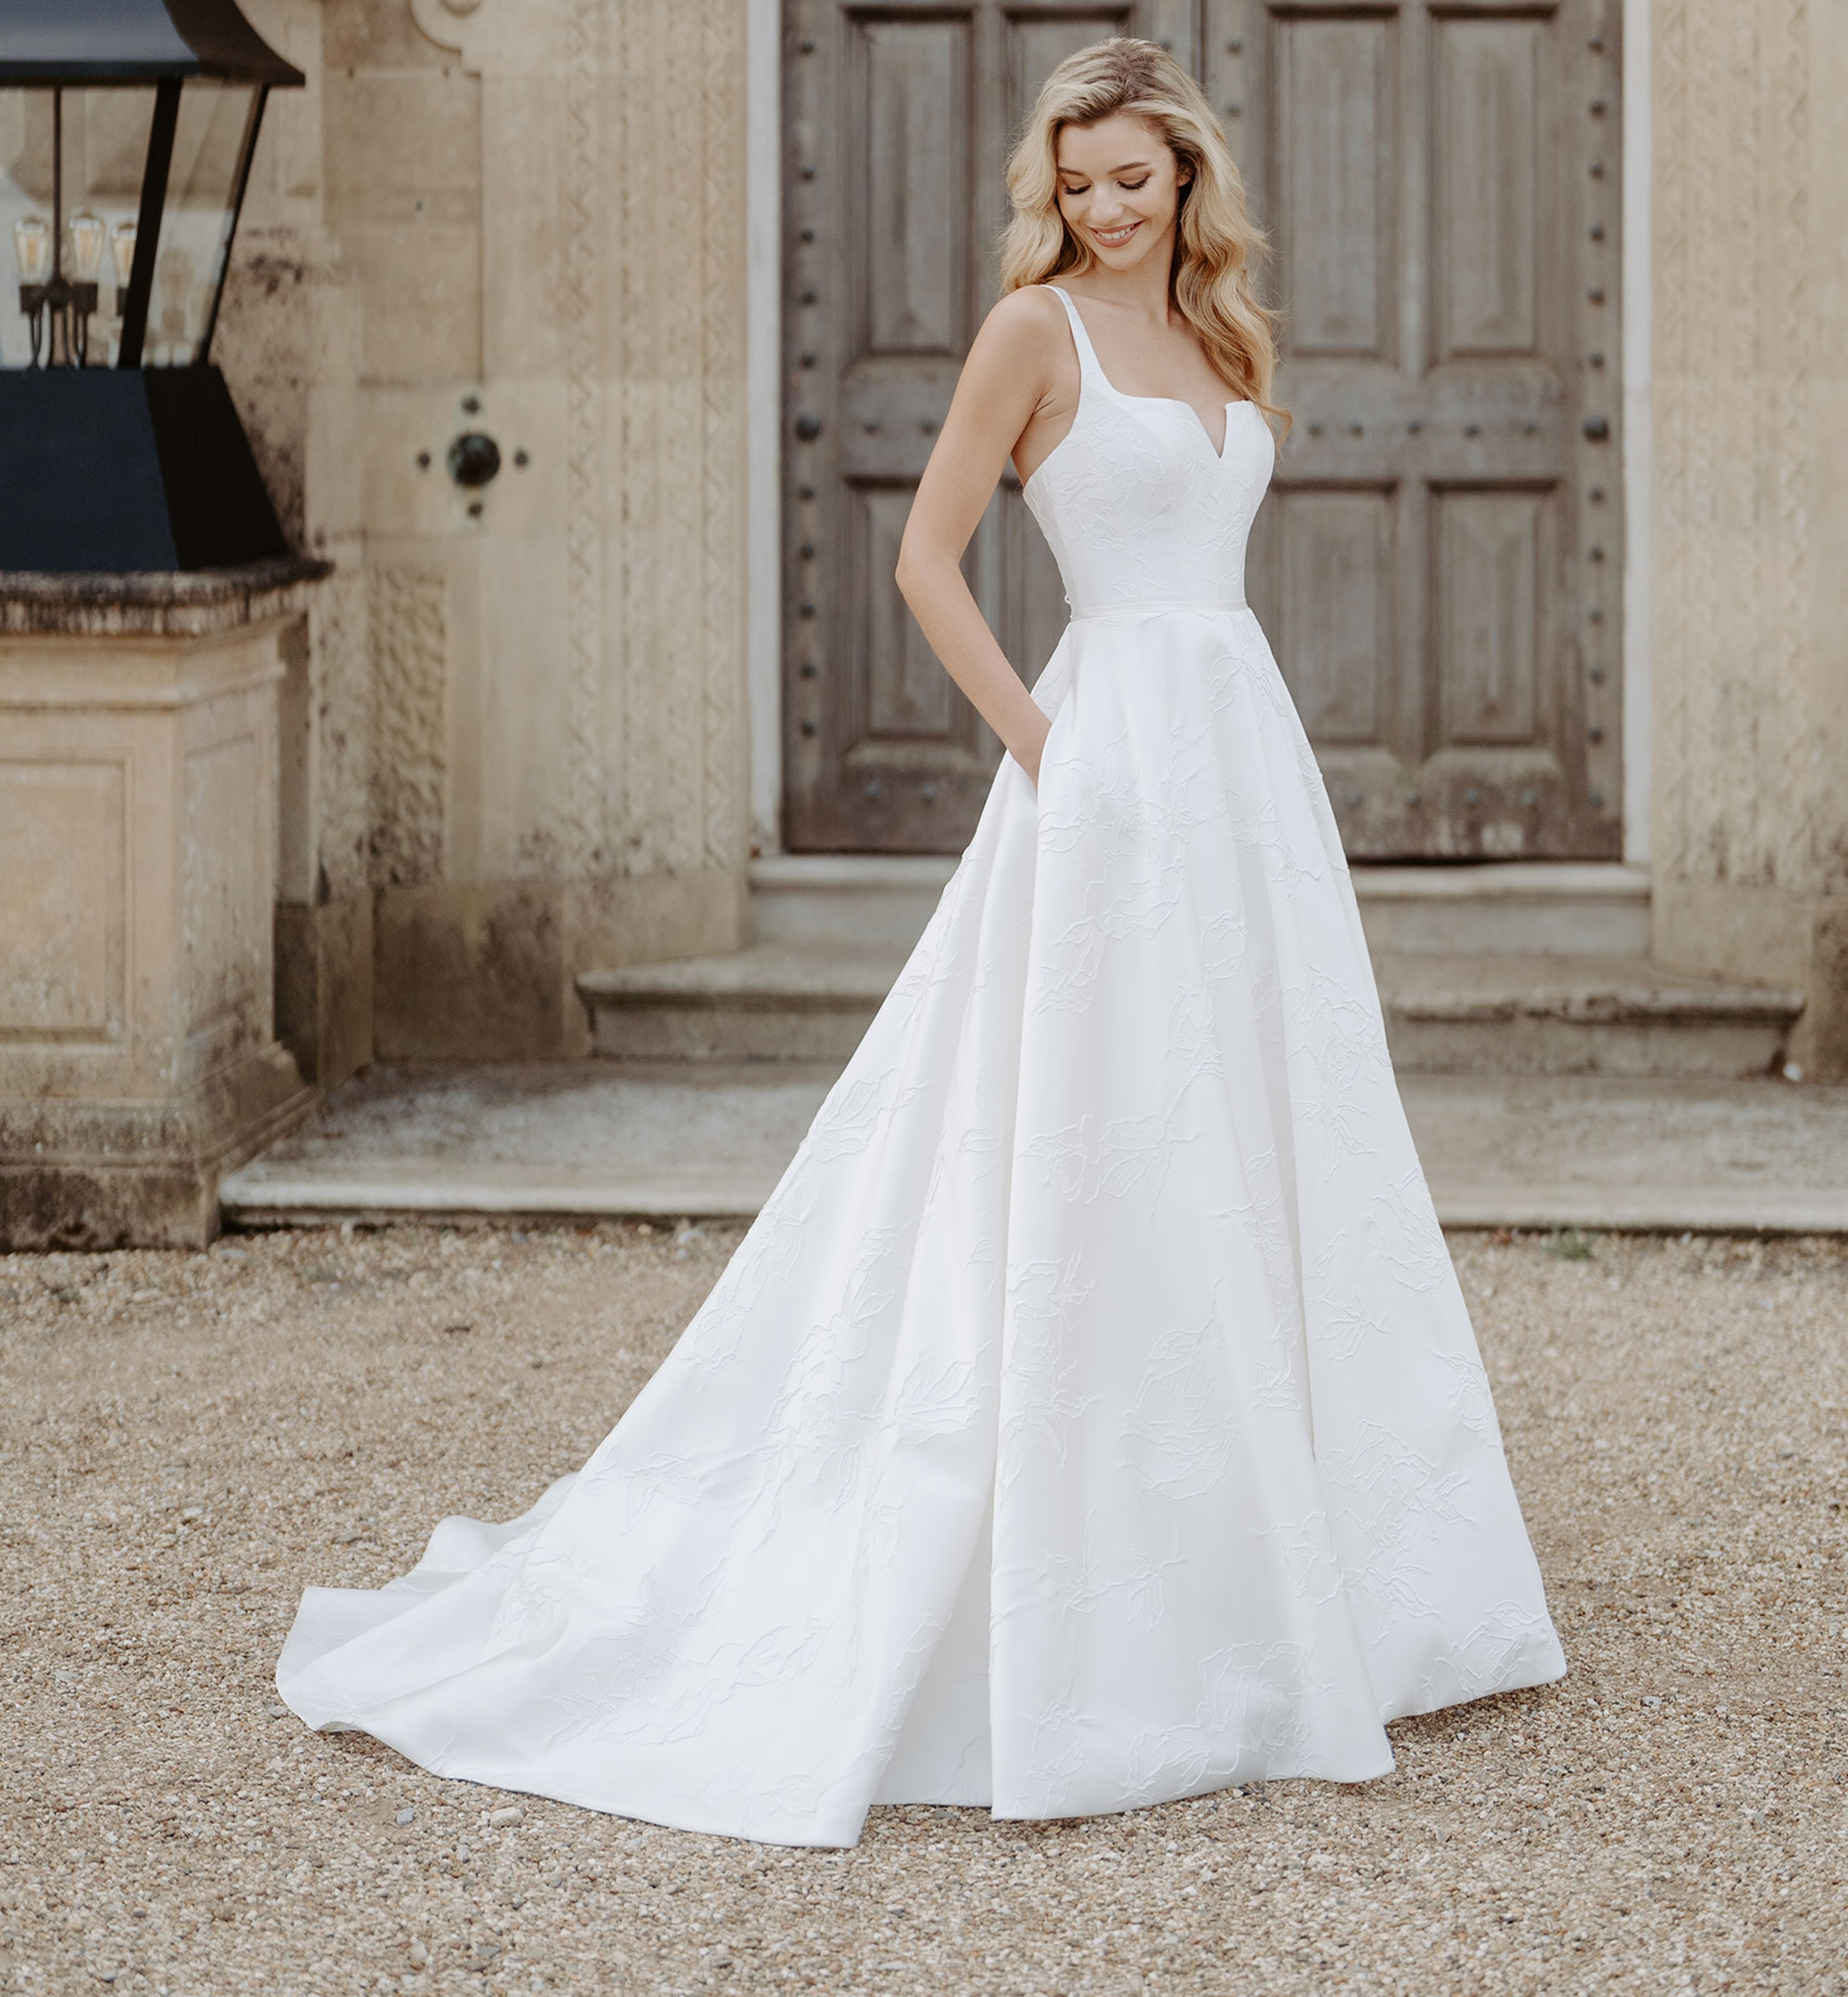 Suzanne Neville Opulence Collection Bridal Trunk Show